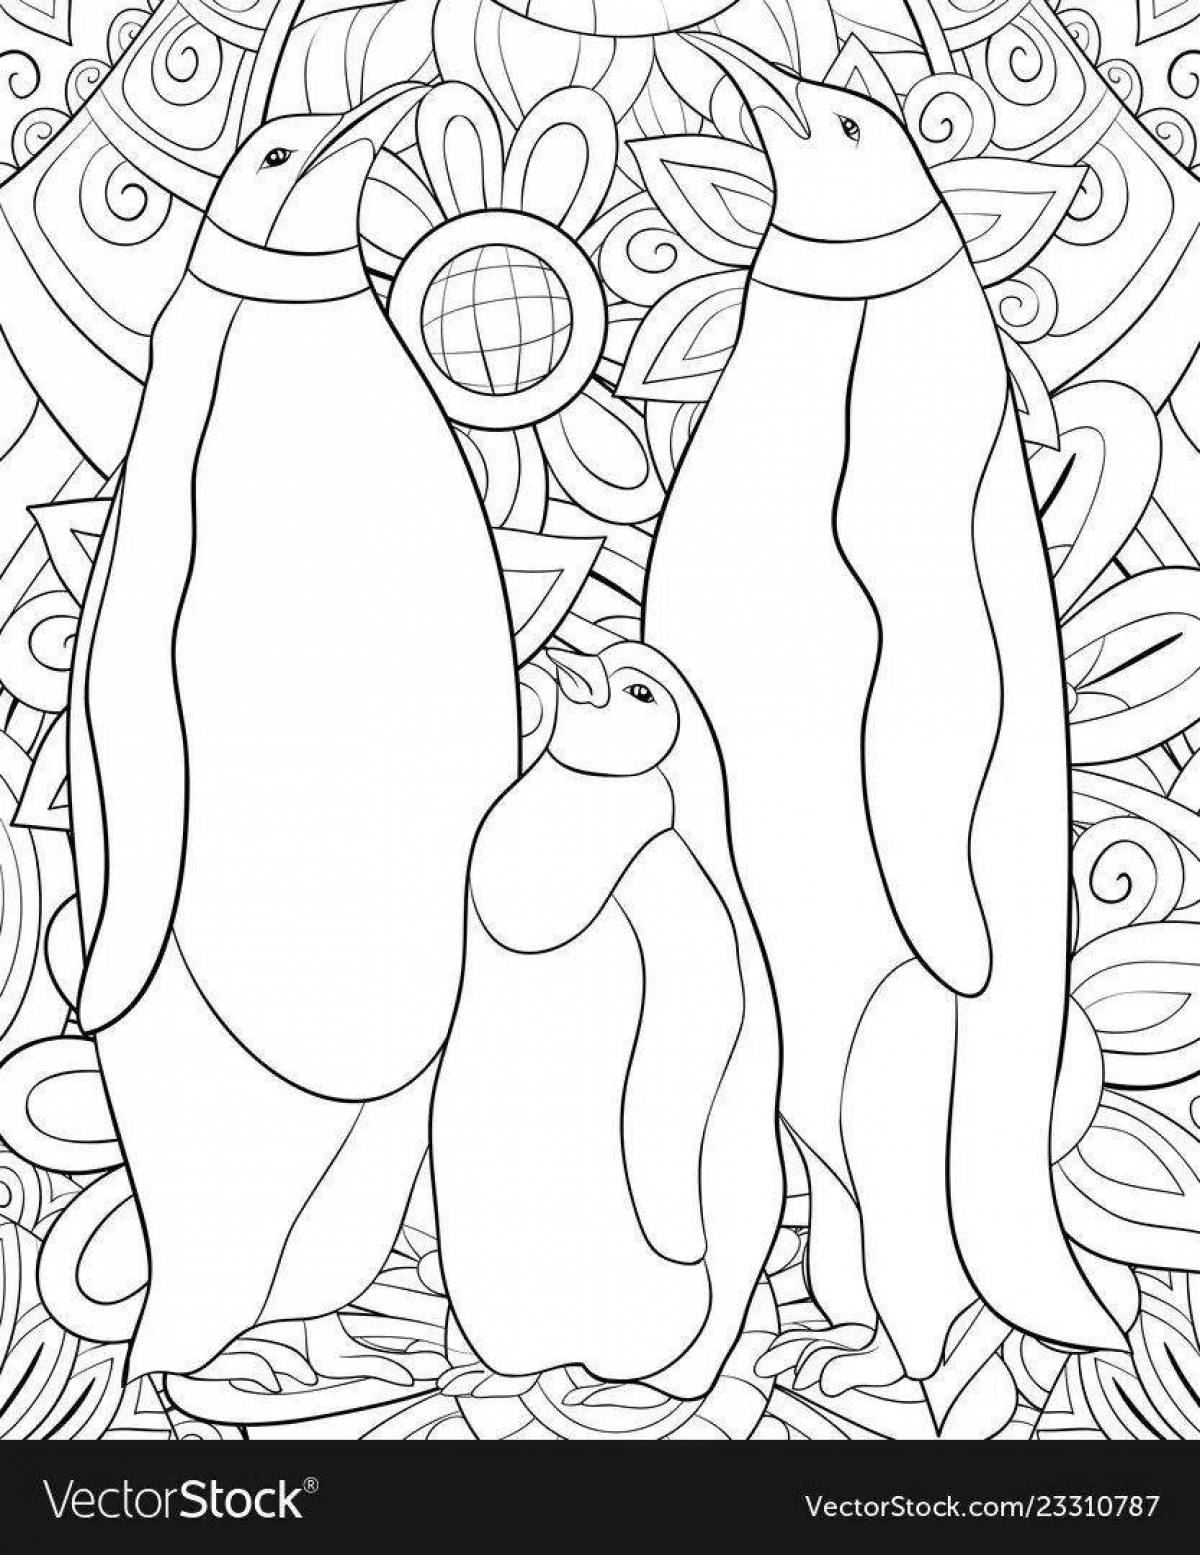 Coloring page witty penguin family